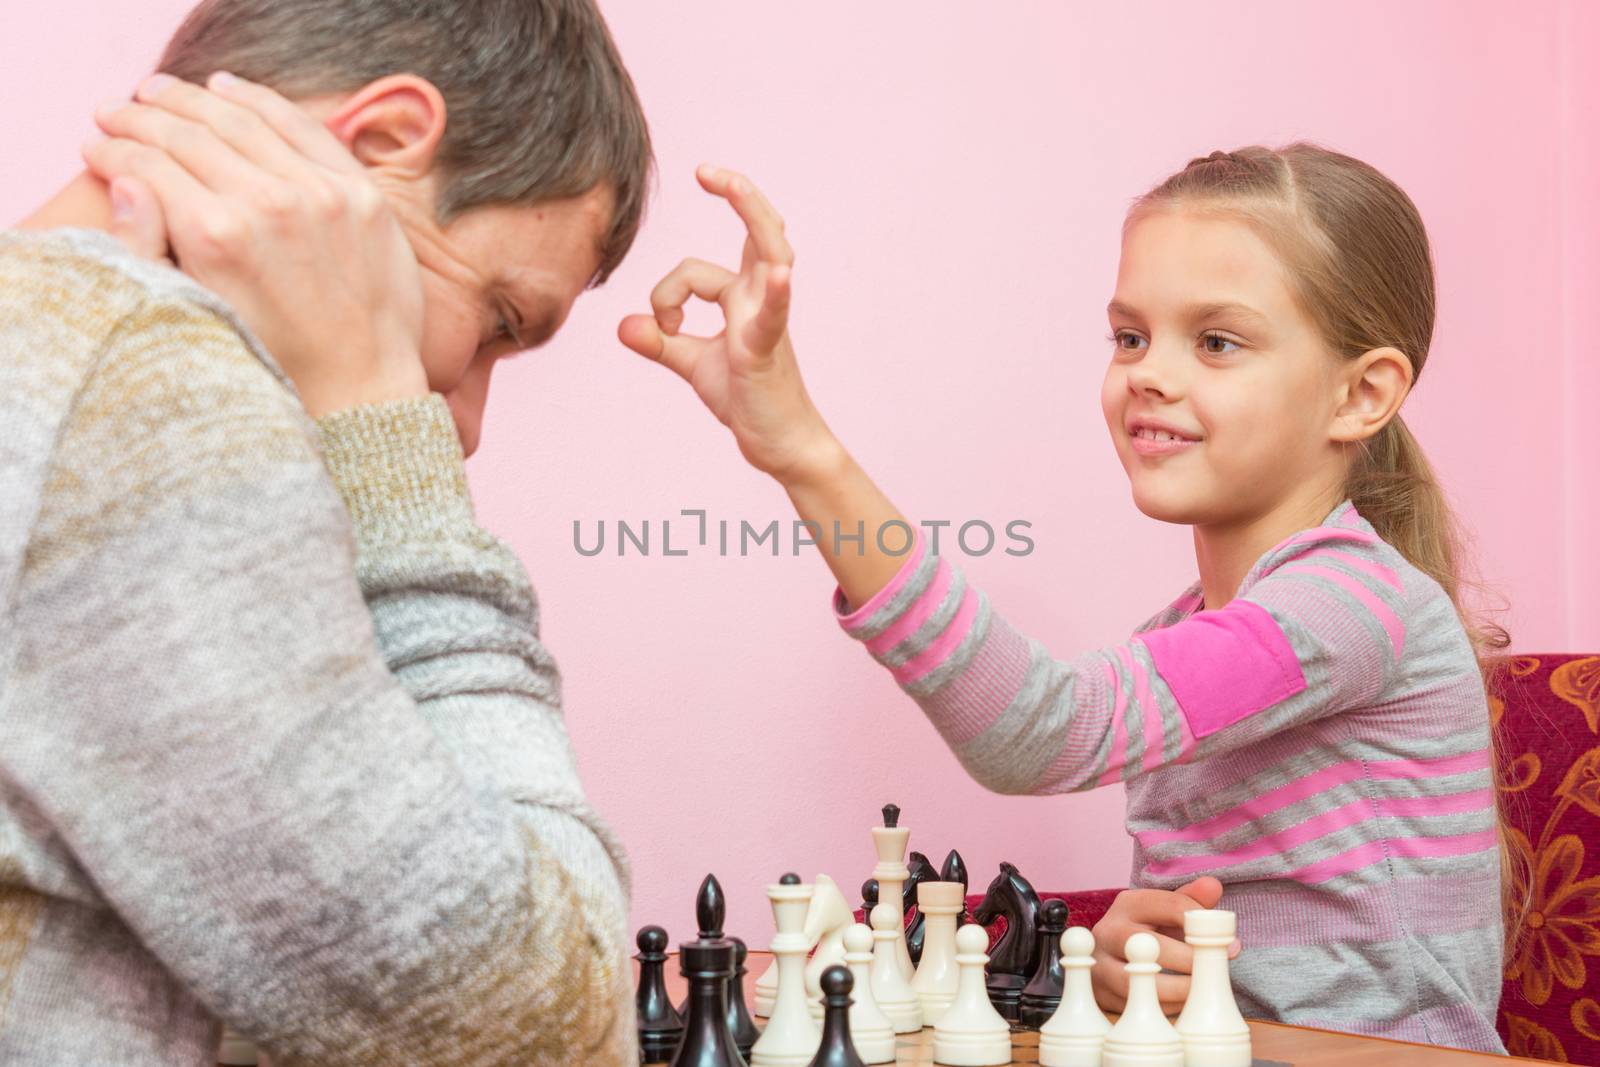 My daughter has a finger on the pope's head, who lost a game of chess